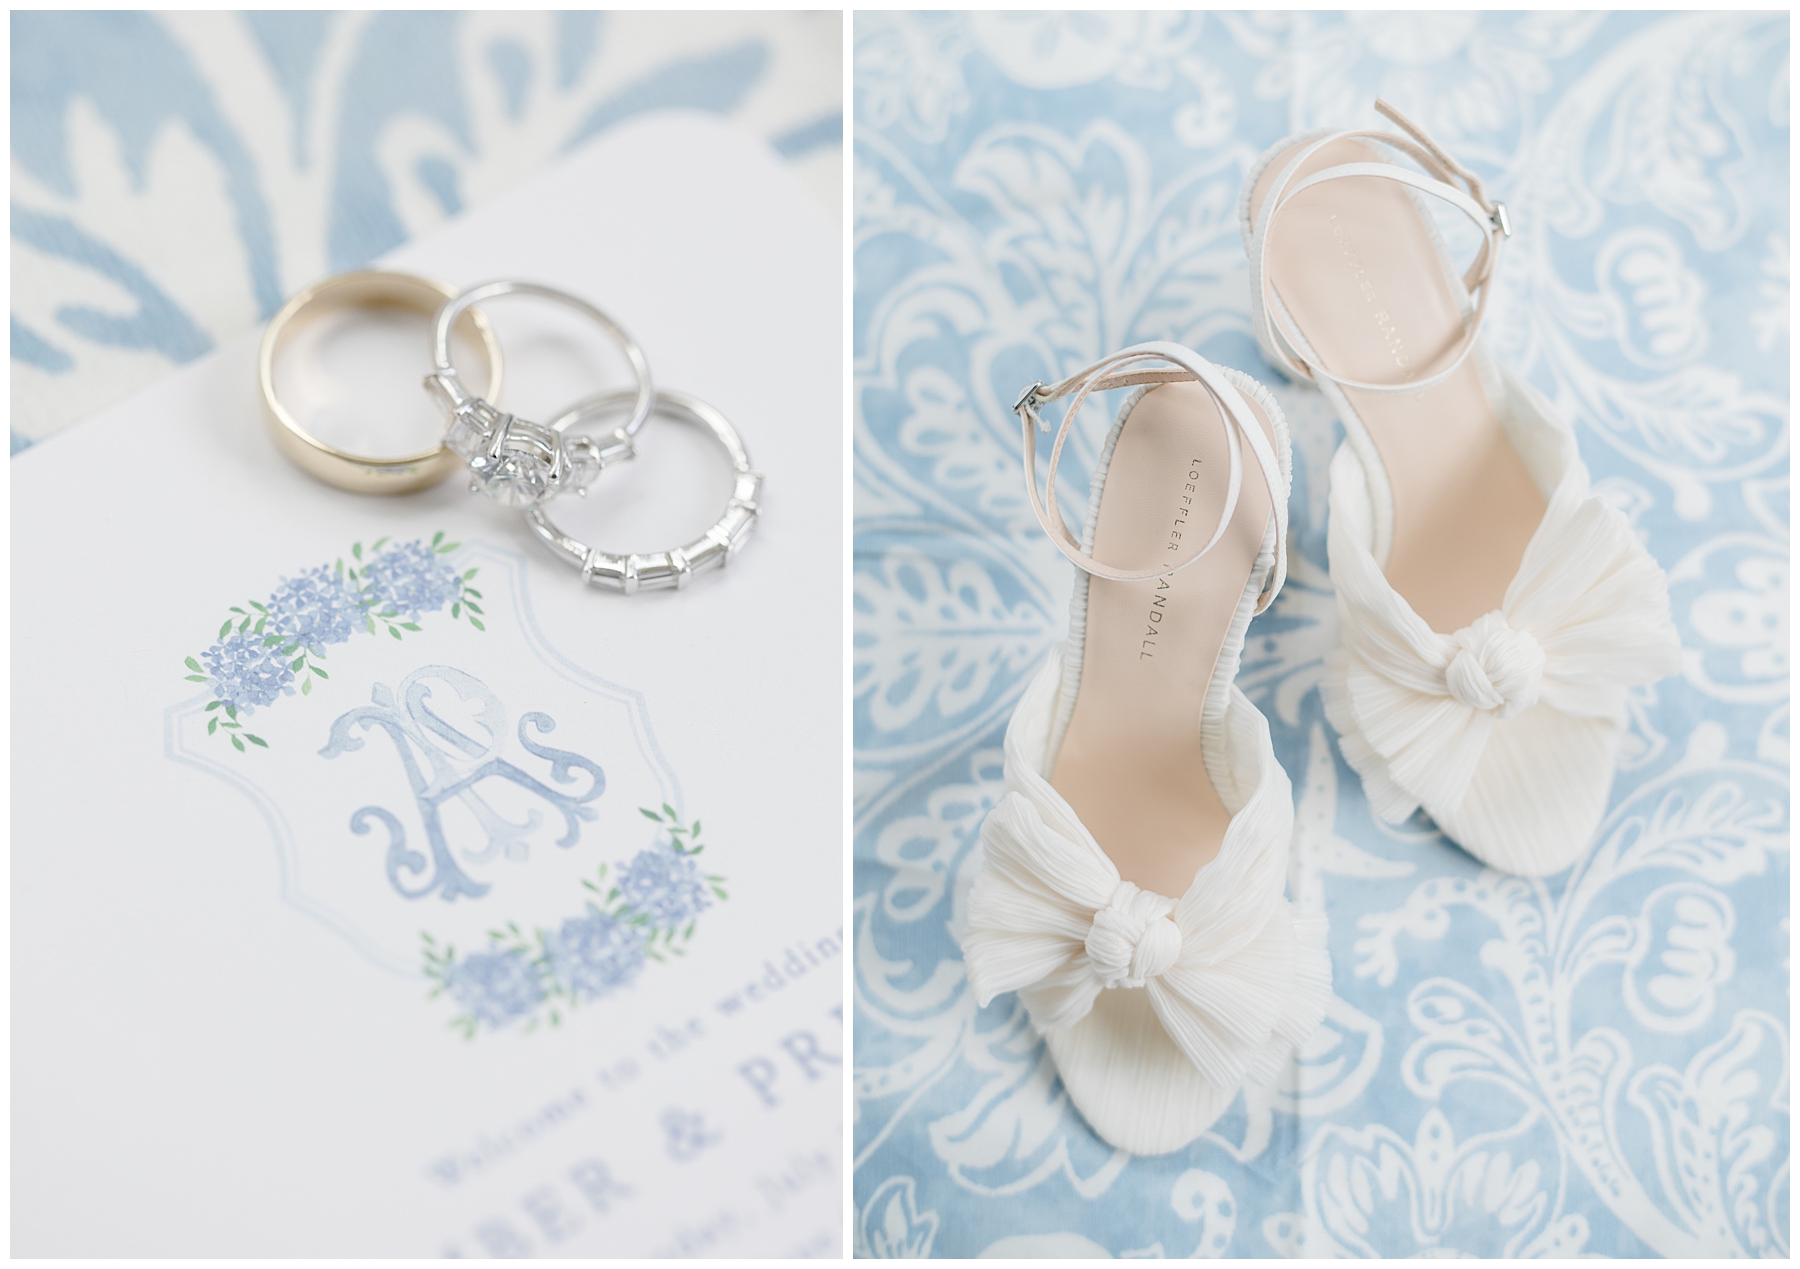 wedding invites and wedding shoes from Dreamy Cape Cod Wedding at The Dennis Inn